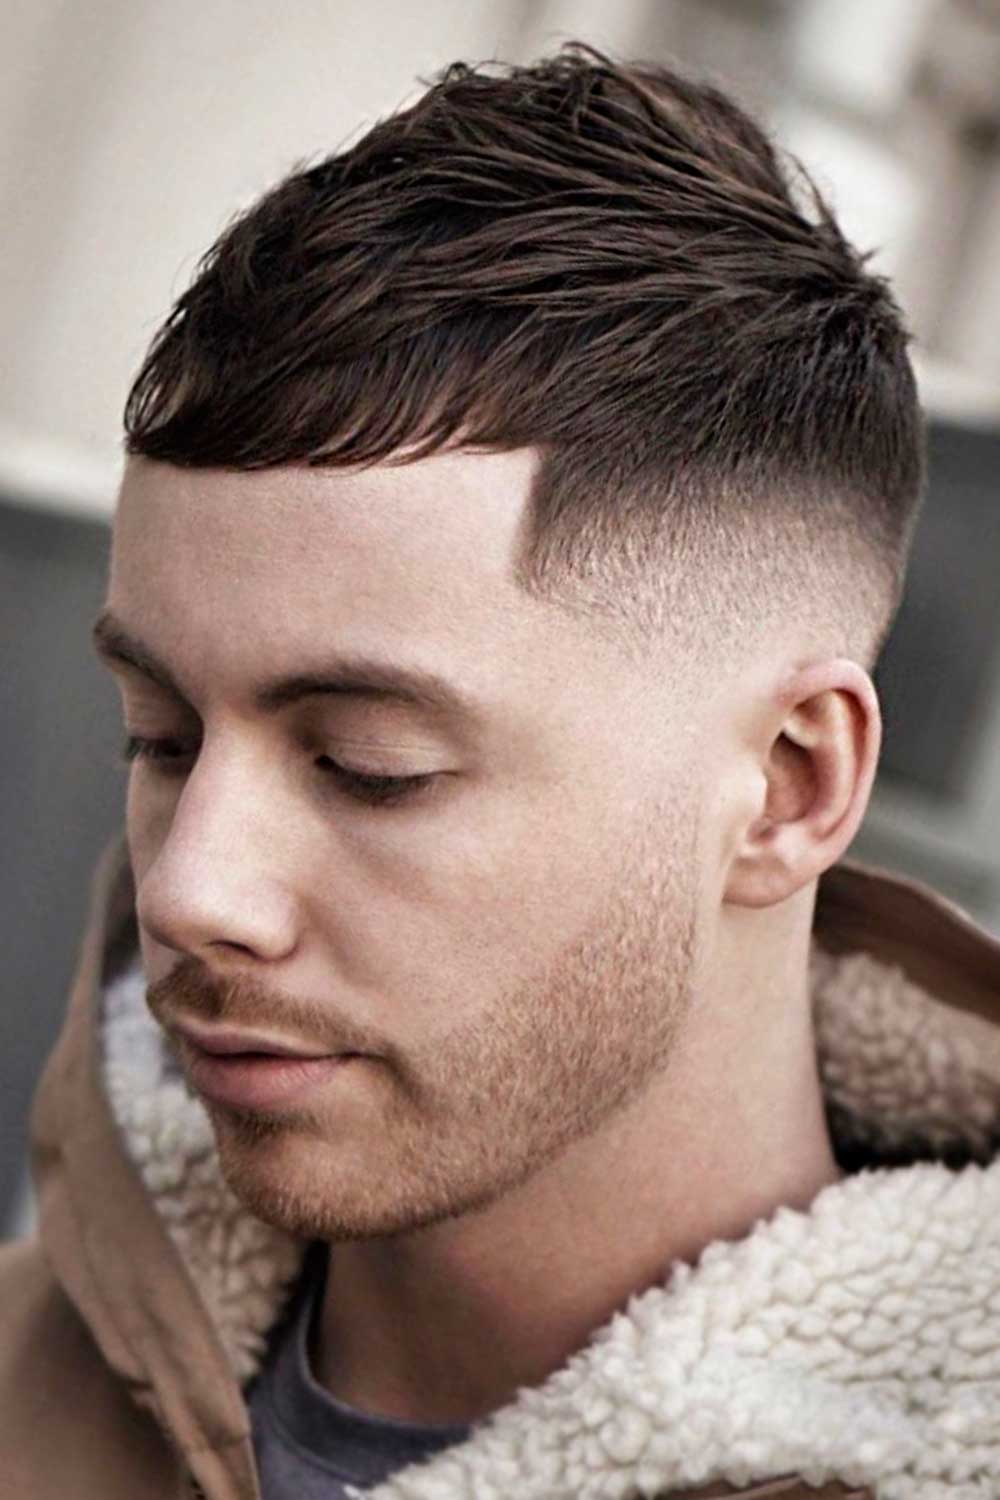 French Crop Hairstyles #typesofhaircutsmen #typesofhaircuts #haircutsmen #hairstylesmen